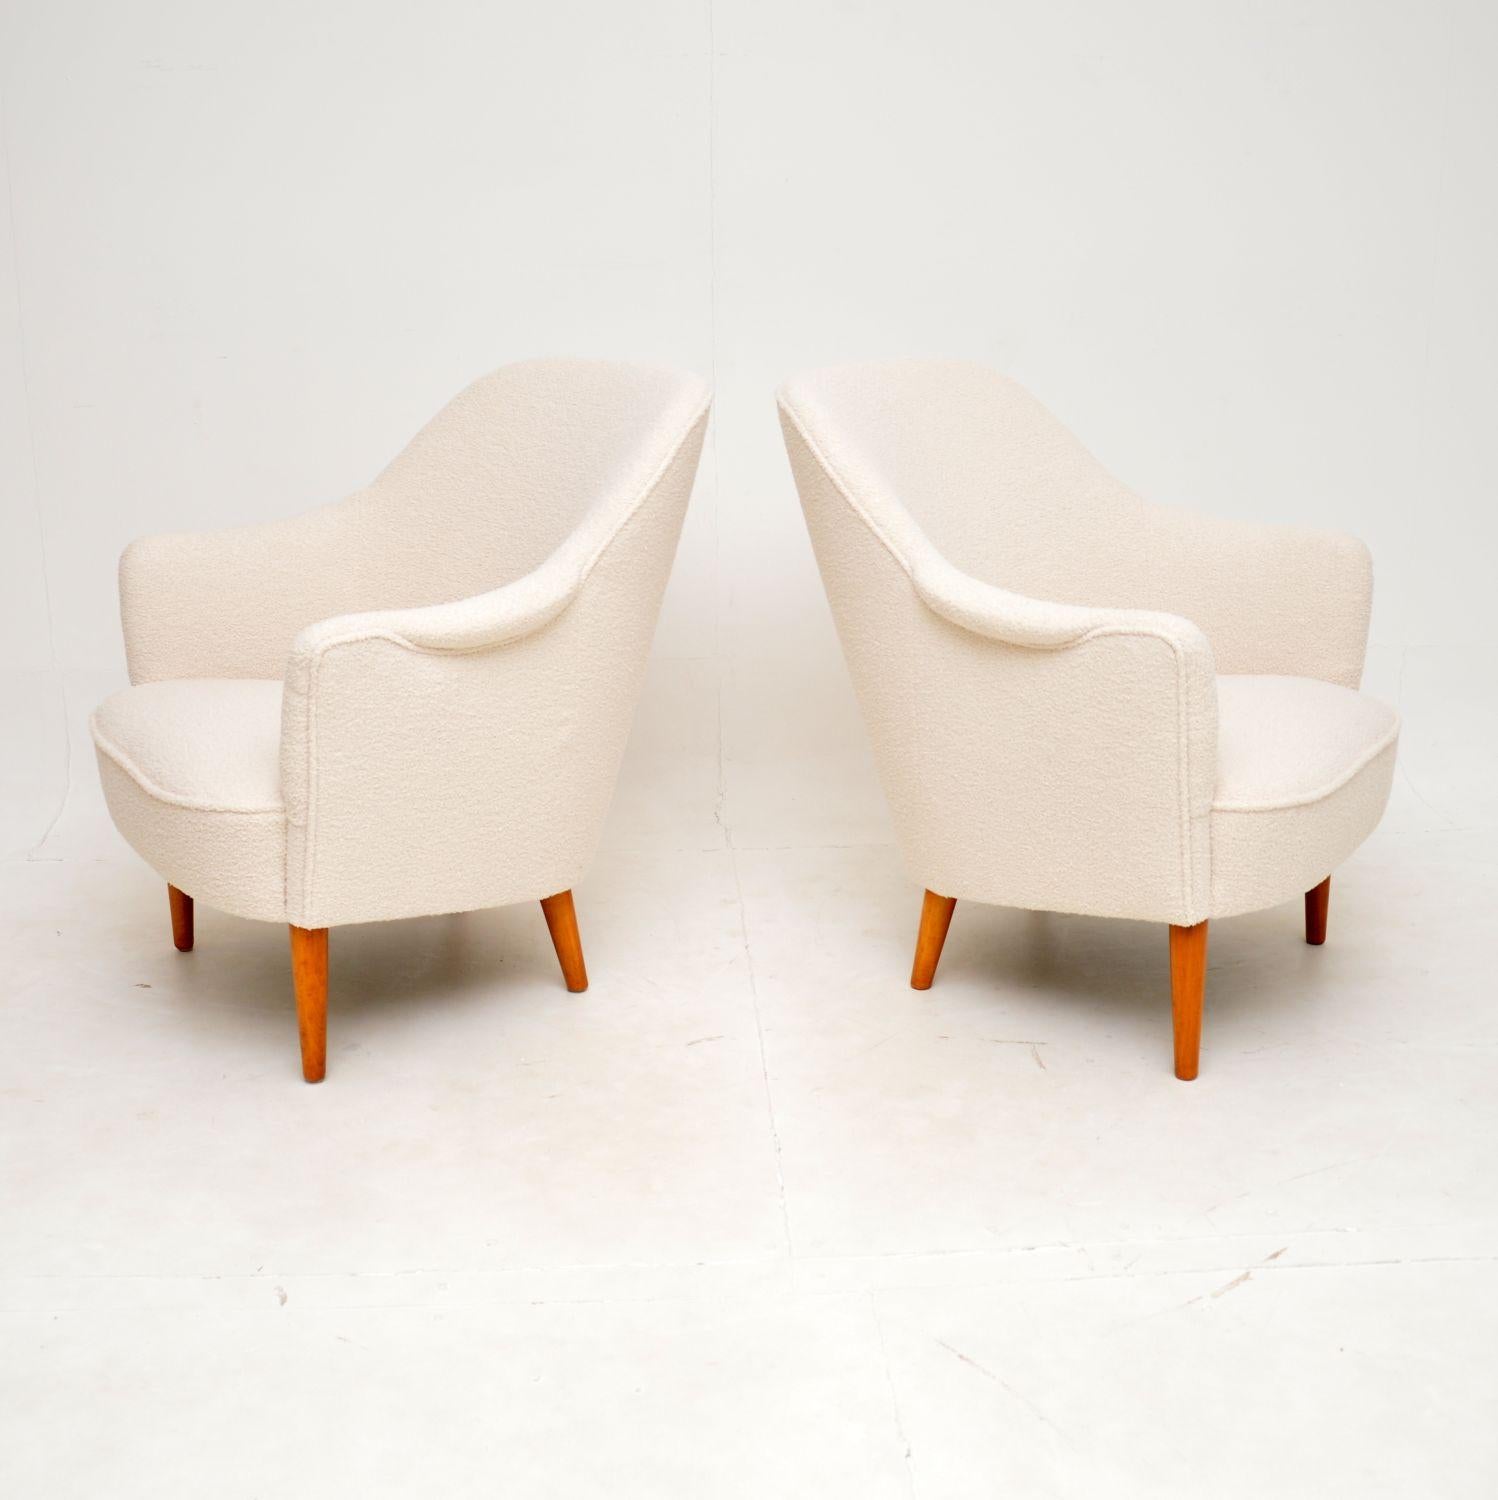 A stunning pair of Swedish vintage ‘Samspel’ armchairs by Carl Malmsten. They were recently imported from Sweden, and they date from around the 1960-70’s.

The quality is outstanding, they are generous in proportions and are extremely comfortable.